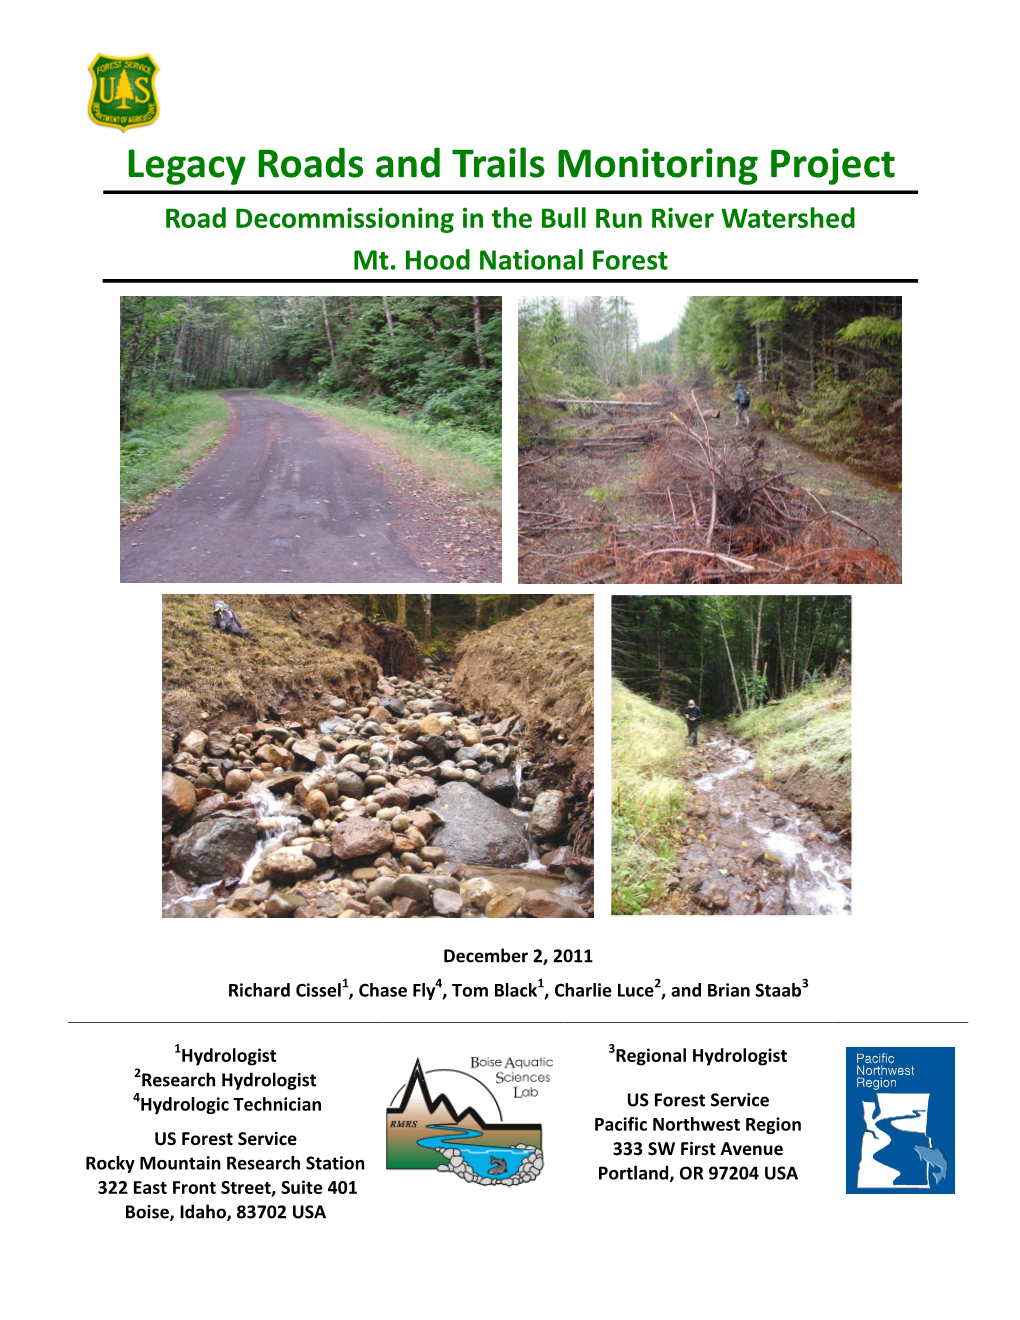 Legacy Roads and Trails Monitoring Project Road Decommissioning in the Bull Run River Watershed Mt